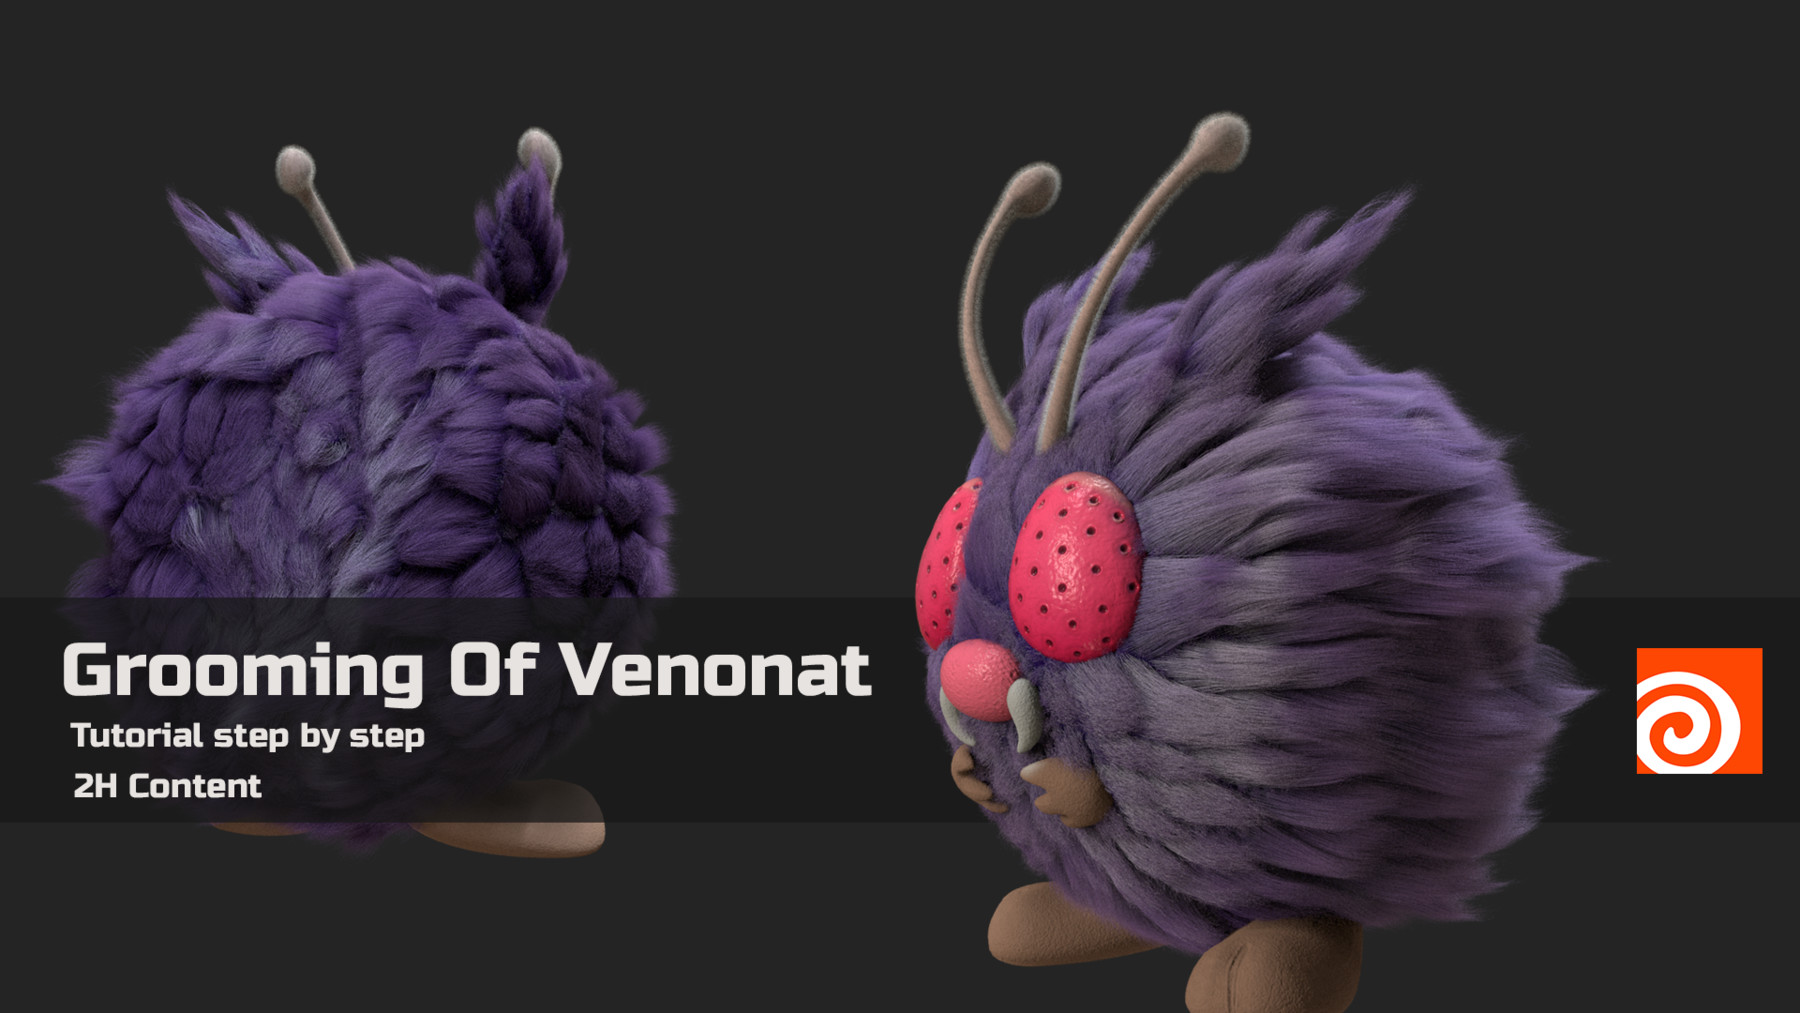 A title card for the venonat tutorial, showing a side and back profile of the character